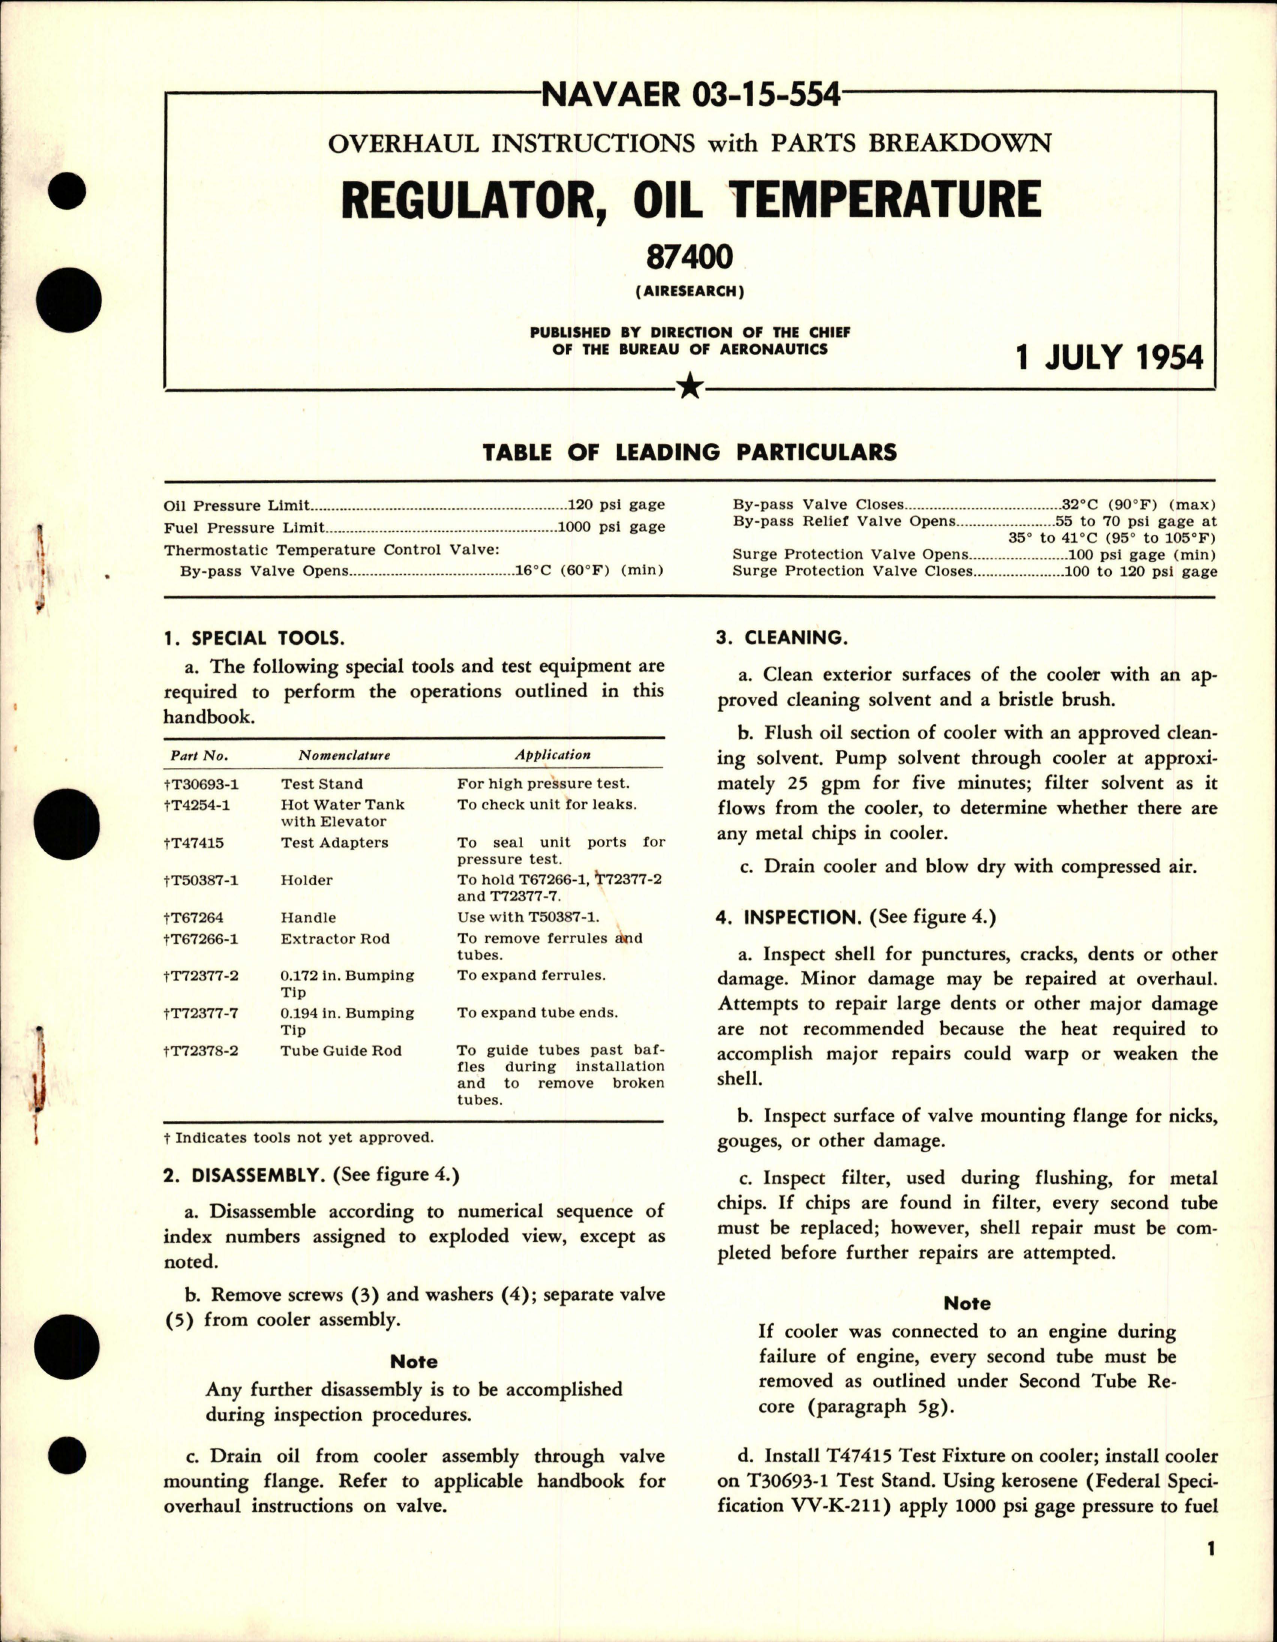 Sample page 1 from AirCorps Library document: Overhaul Instructions with Parts for Oil Temperature Regulator - 87400